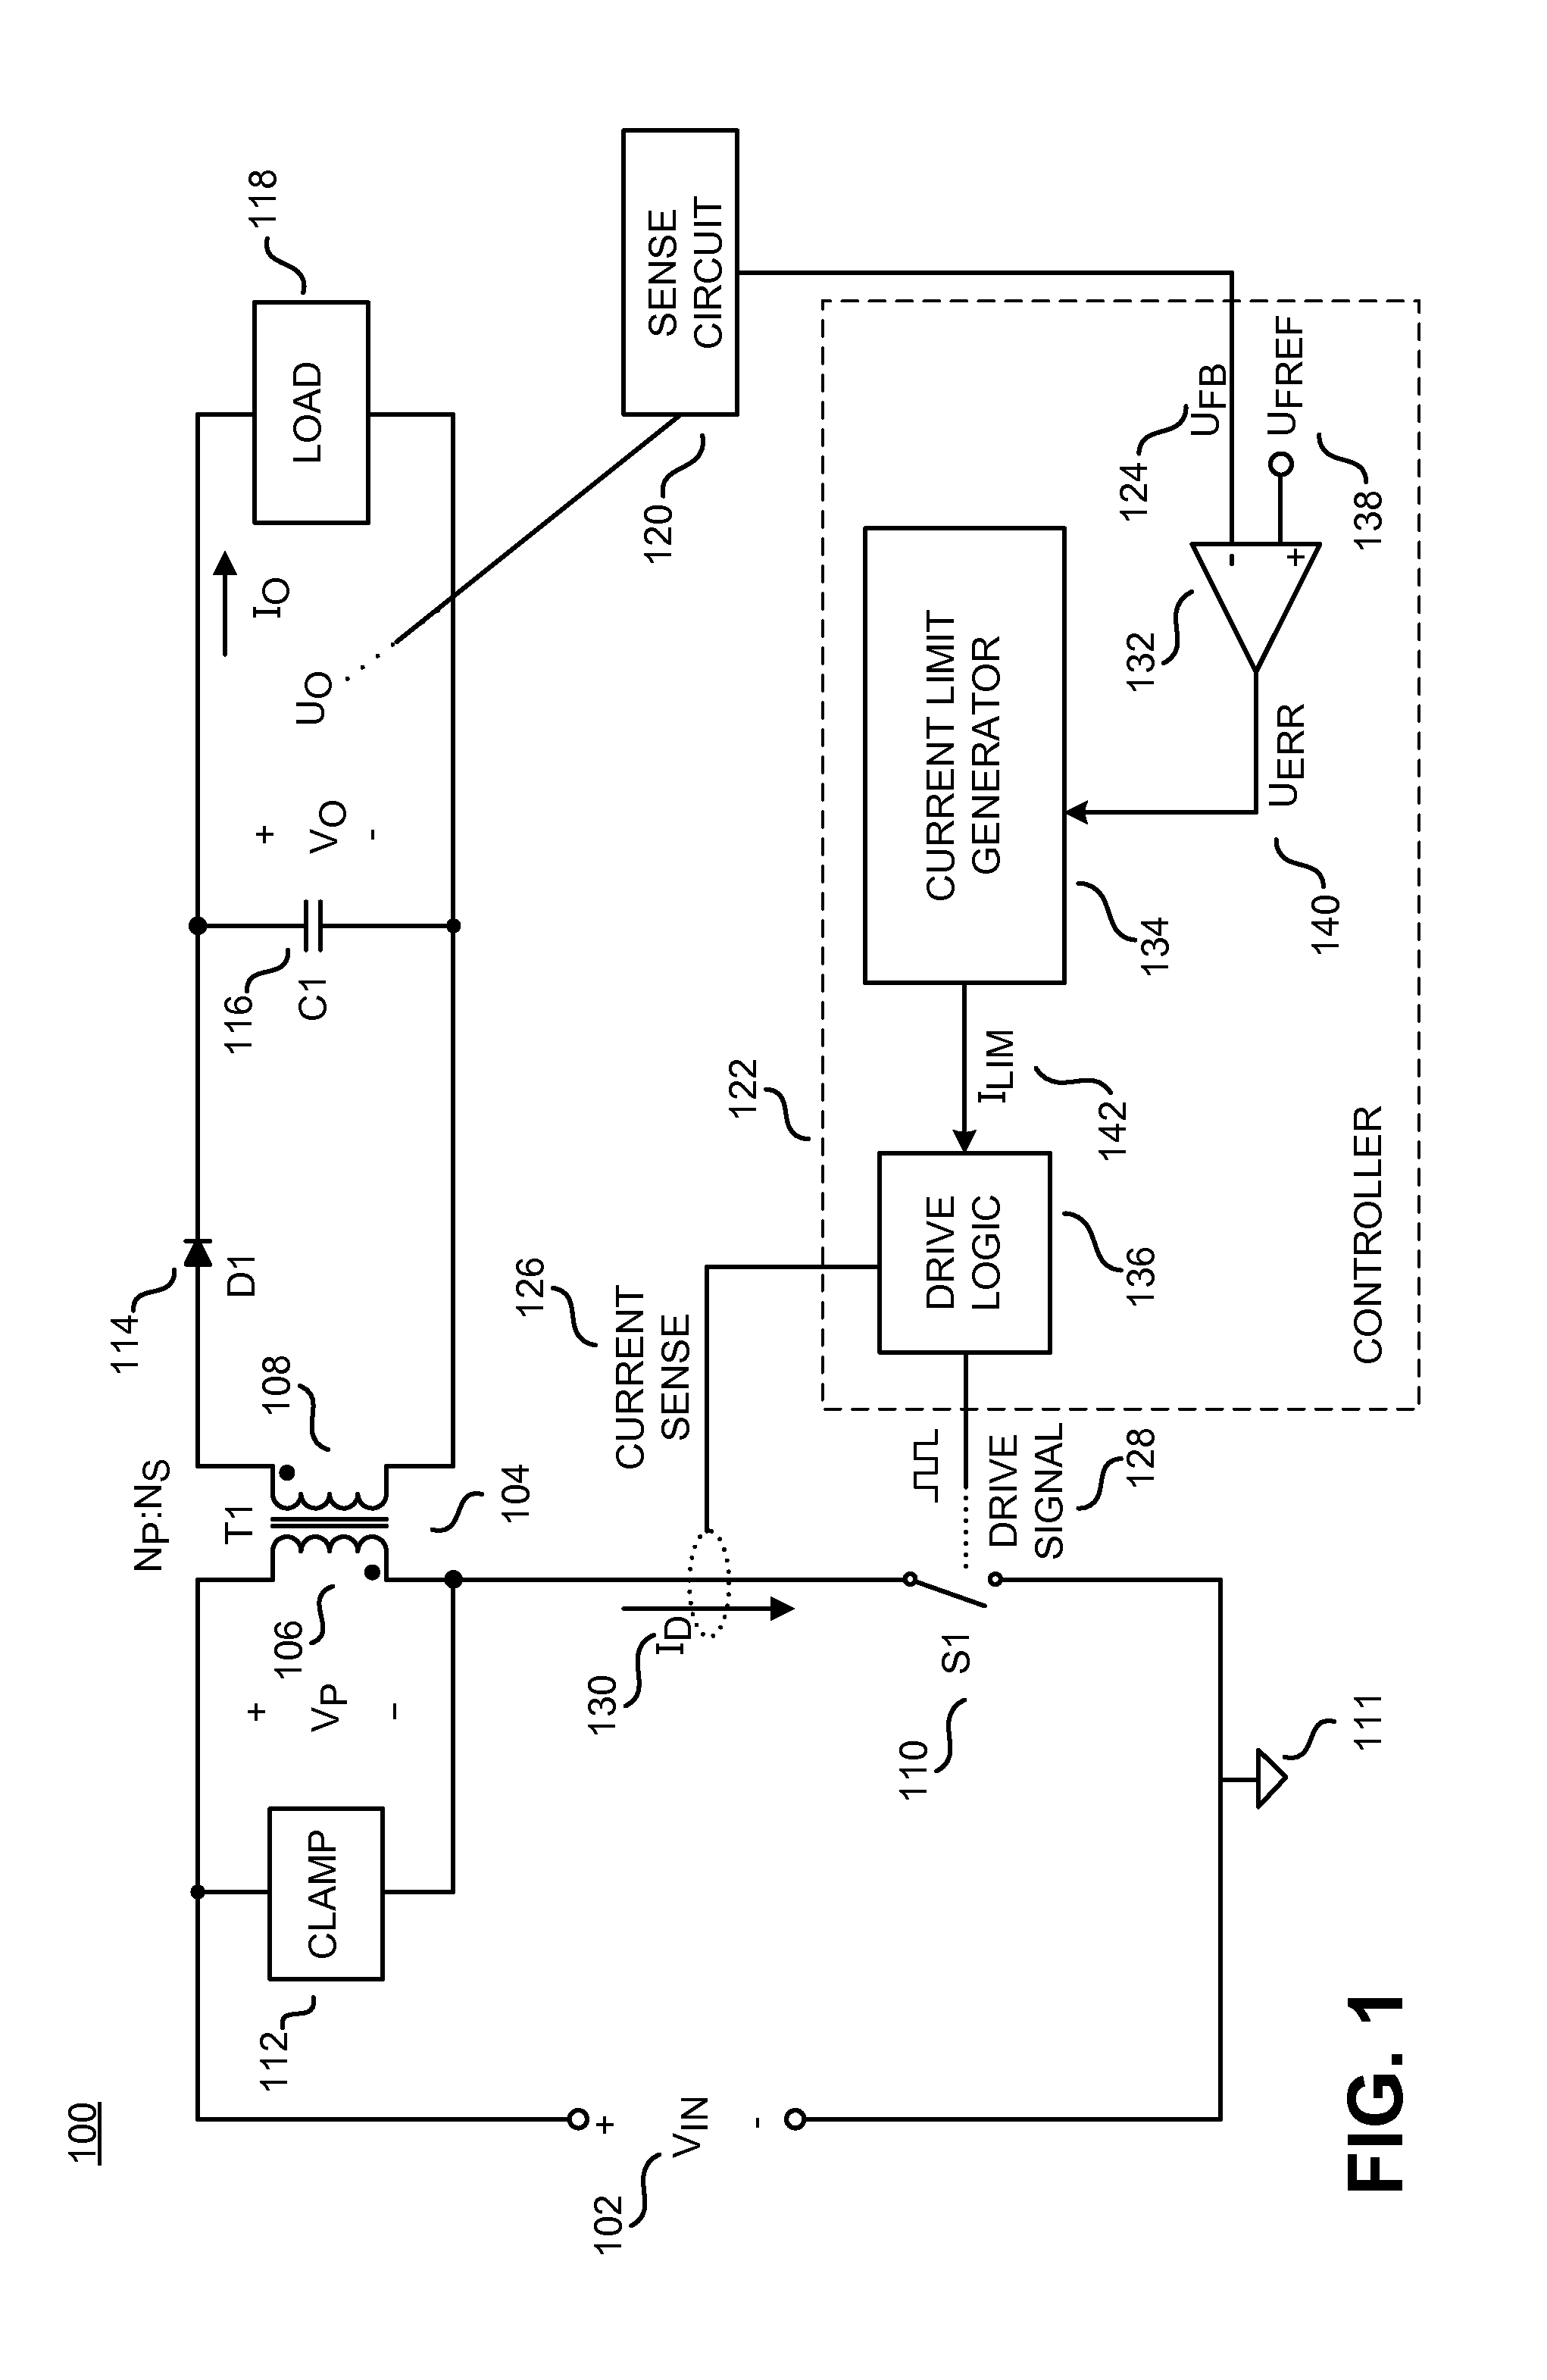 Controller with constant current limit